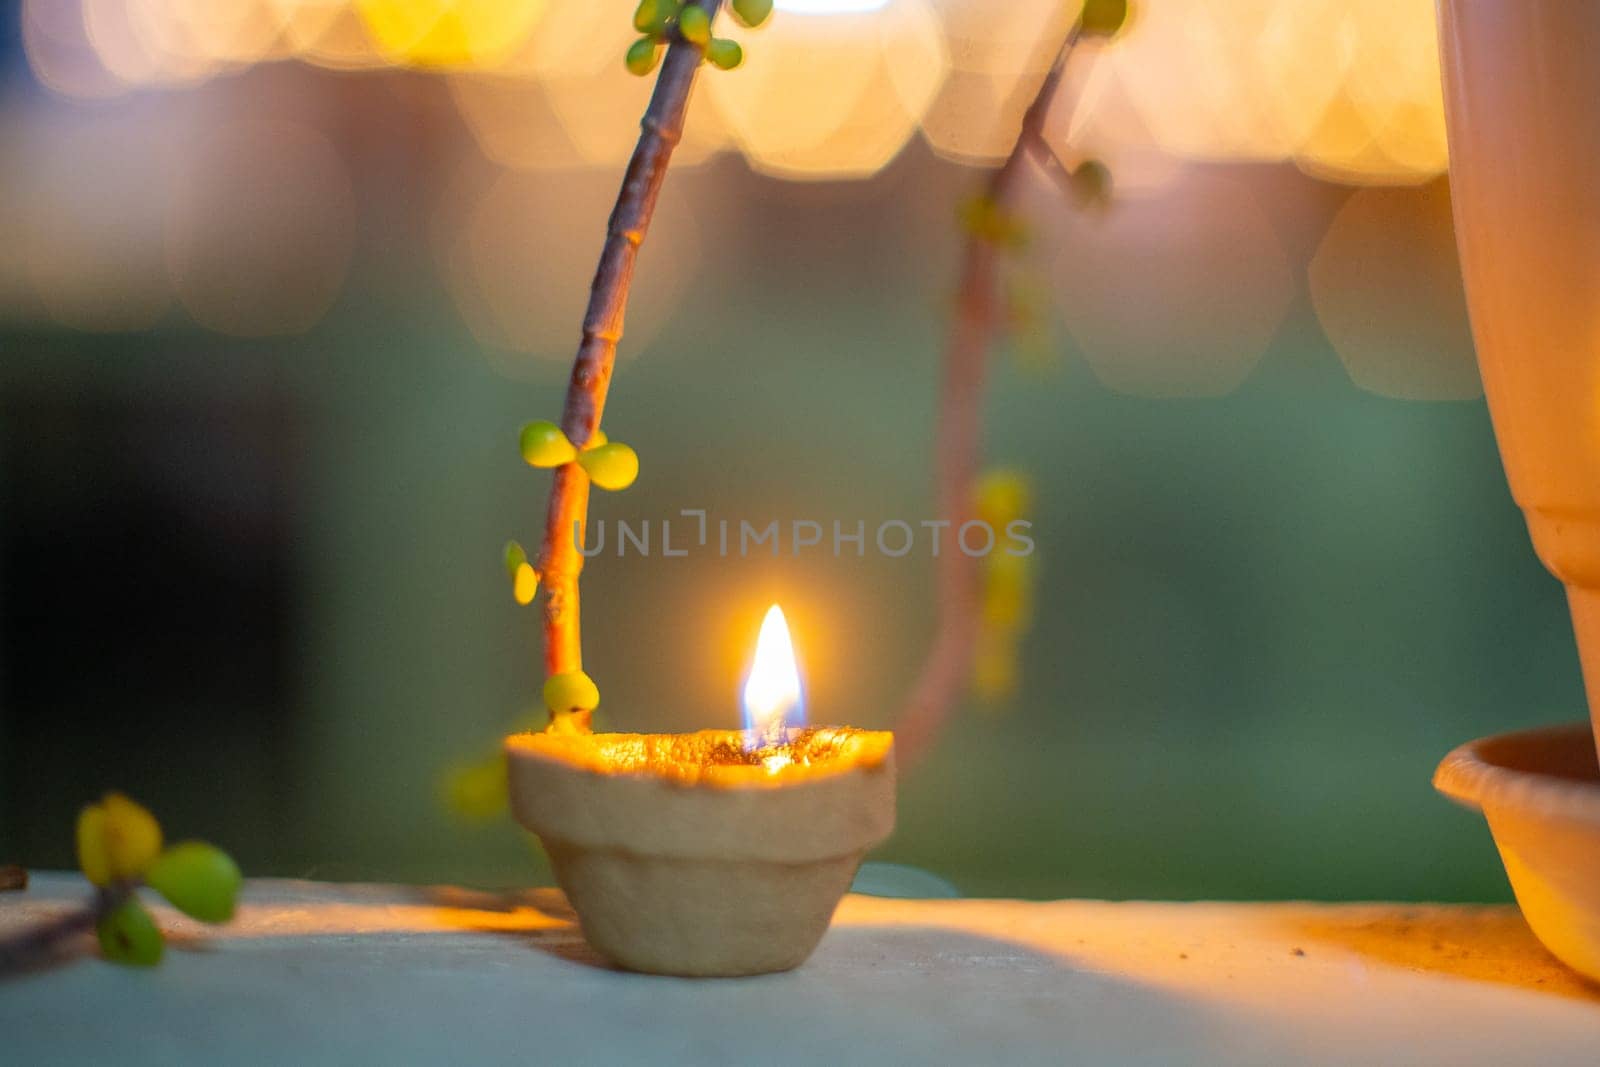 Organic diya lamp made of organic coconut fiber filled with oil and lit to provide light and as an offering to the hindu gods on the festival of diwali by Shalinimathur